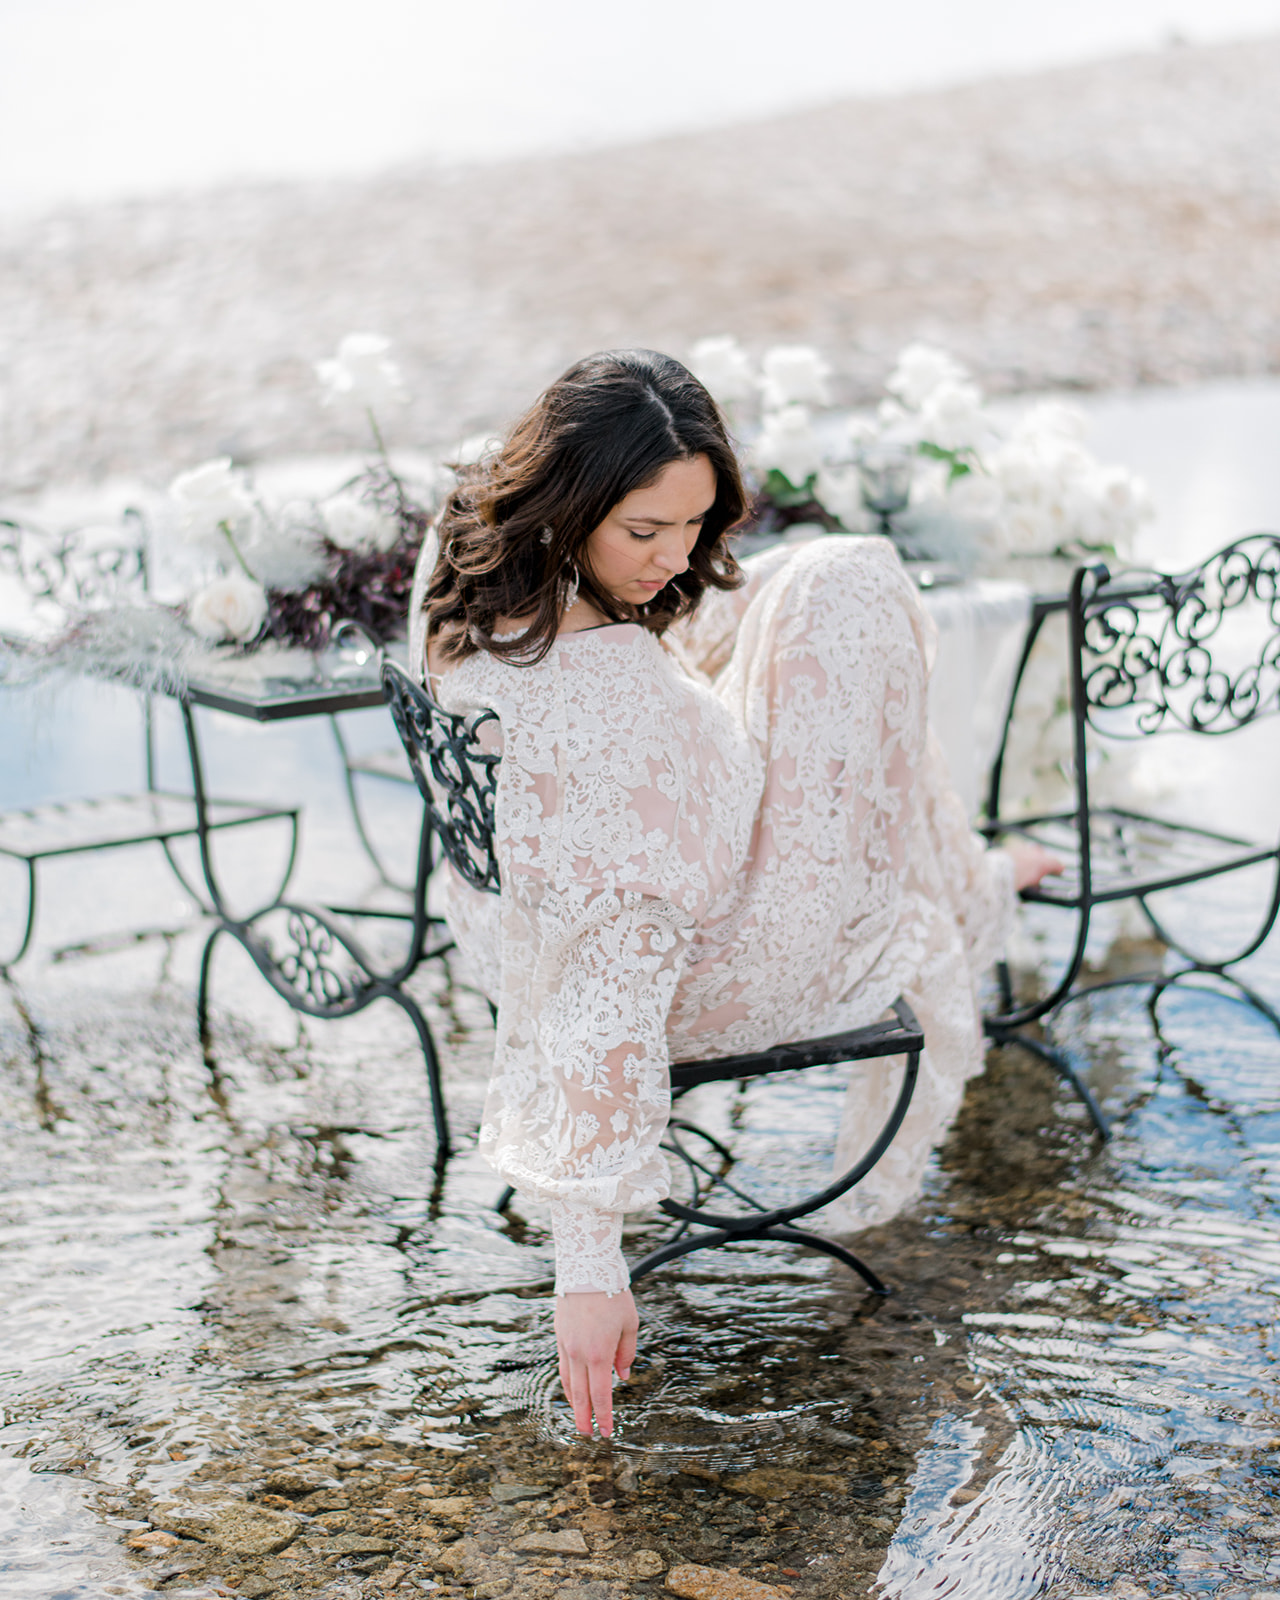 Bride wearing Julia gown by Anna Kova, intimate Okanagan bridal portraits, lakeside and mountain elopement inspiration. Stunning bridal portrait in an ethereal bridal editorial on Lake Okanagan, BC, featured on Brontë Bride.